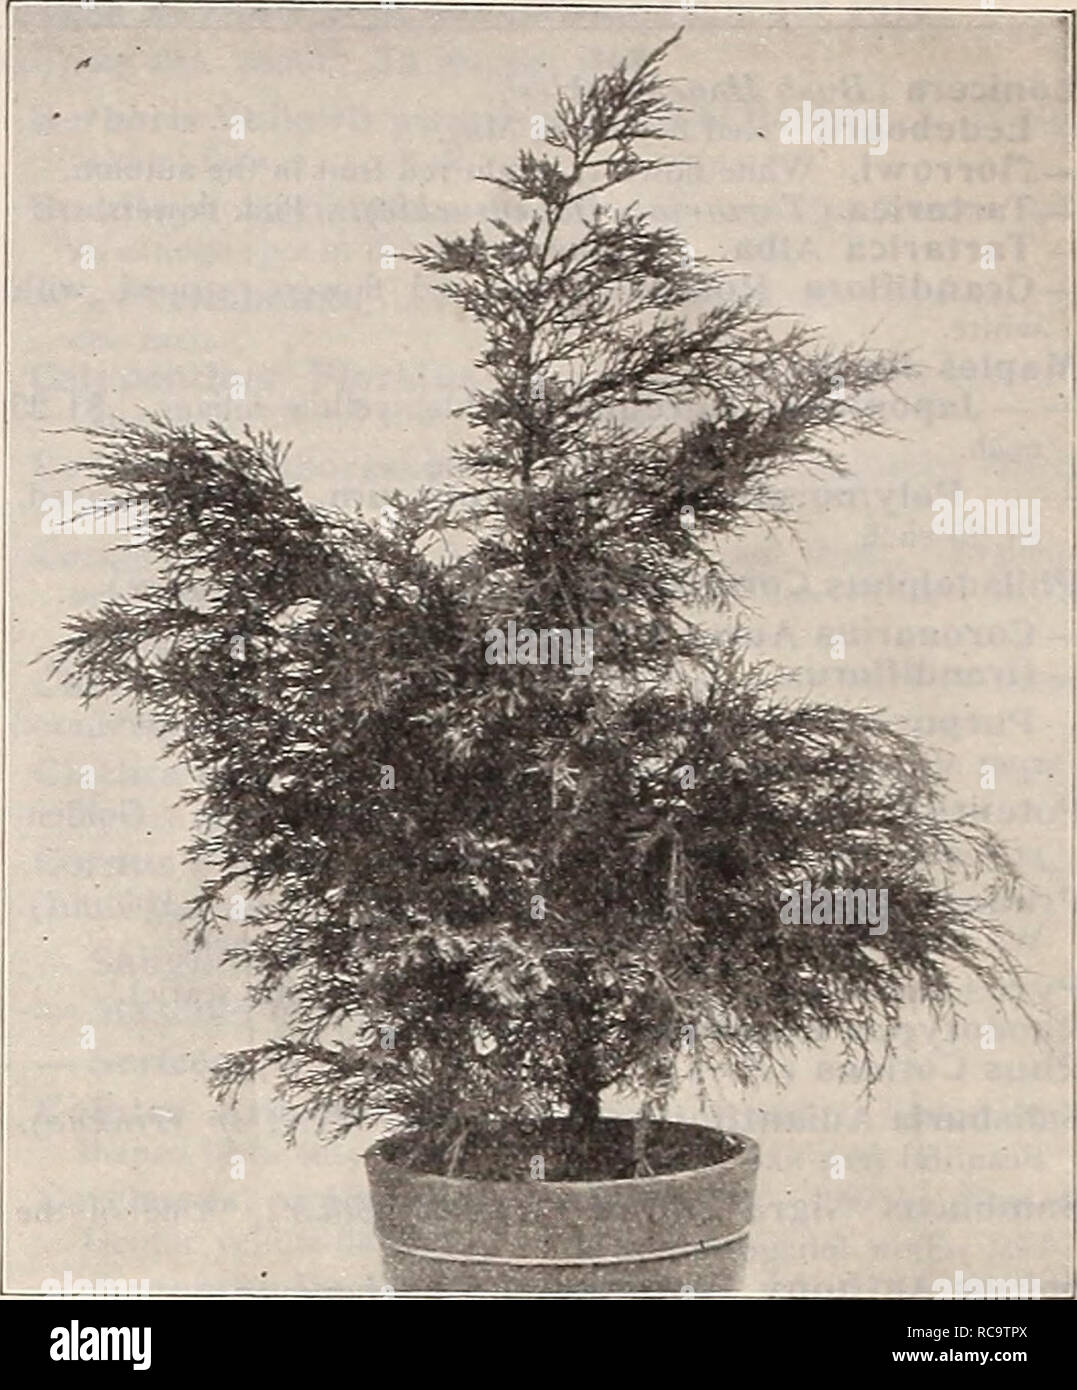 . Dreer's 1910 autumn catalogue. Bulbs (Plants) Catalogs; Flowers Seeds Catalogs; Gardening Equipment and supplies Catalogs; Nurseries (Horticulture) Catalogs; Fruit Seeds Catalogs; Vegetables Seeds Catalogs. Thcyopsis Standishi. Juniperus Pfitzerianus. Picea Pungens Glauca Pendula. Same as the preceding, with pendulous branches. Plants, 2A feet high, $3.50 each. Picea Alcockiana (Alcock's Spruce). An attractive tree. Foliage, dark green above and silvery beneath, giving the whole a variegated appearance. Plants, 3 feet high, $2.00 each. Picea Omorika. Foliage silvery underneath, giving it a u Stock Photo